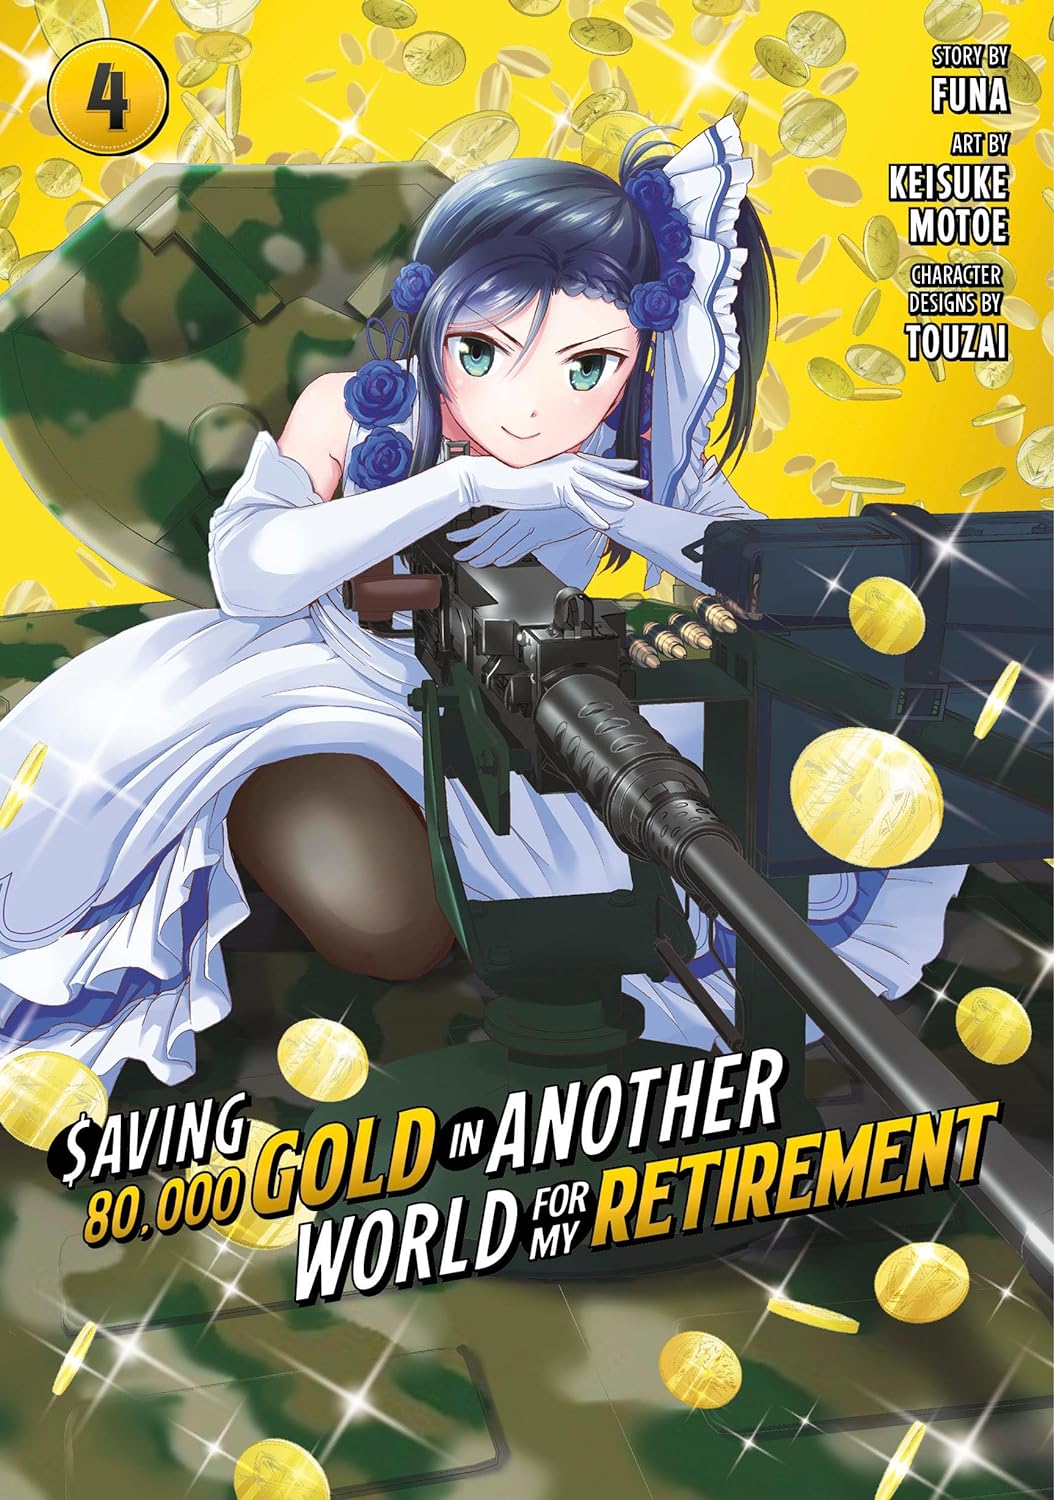 Saving 80,000 Gold in Another World for My Retirement (Manga) Vol. 04